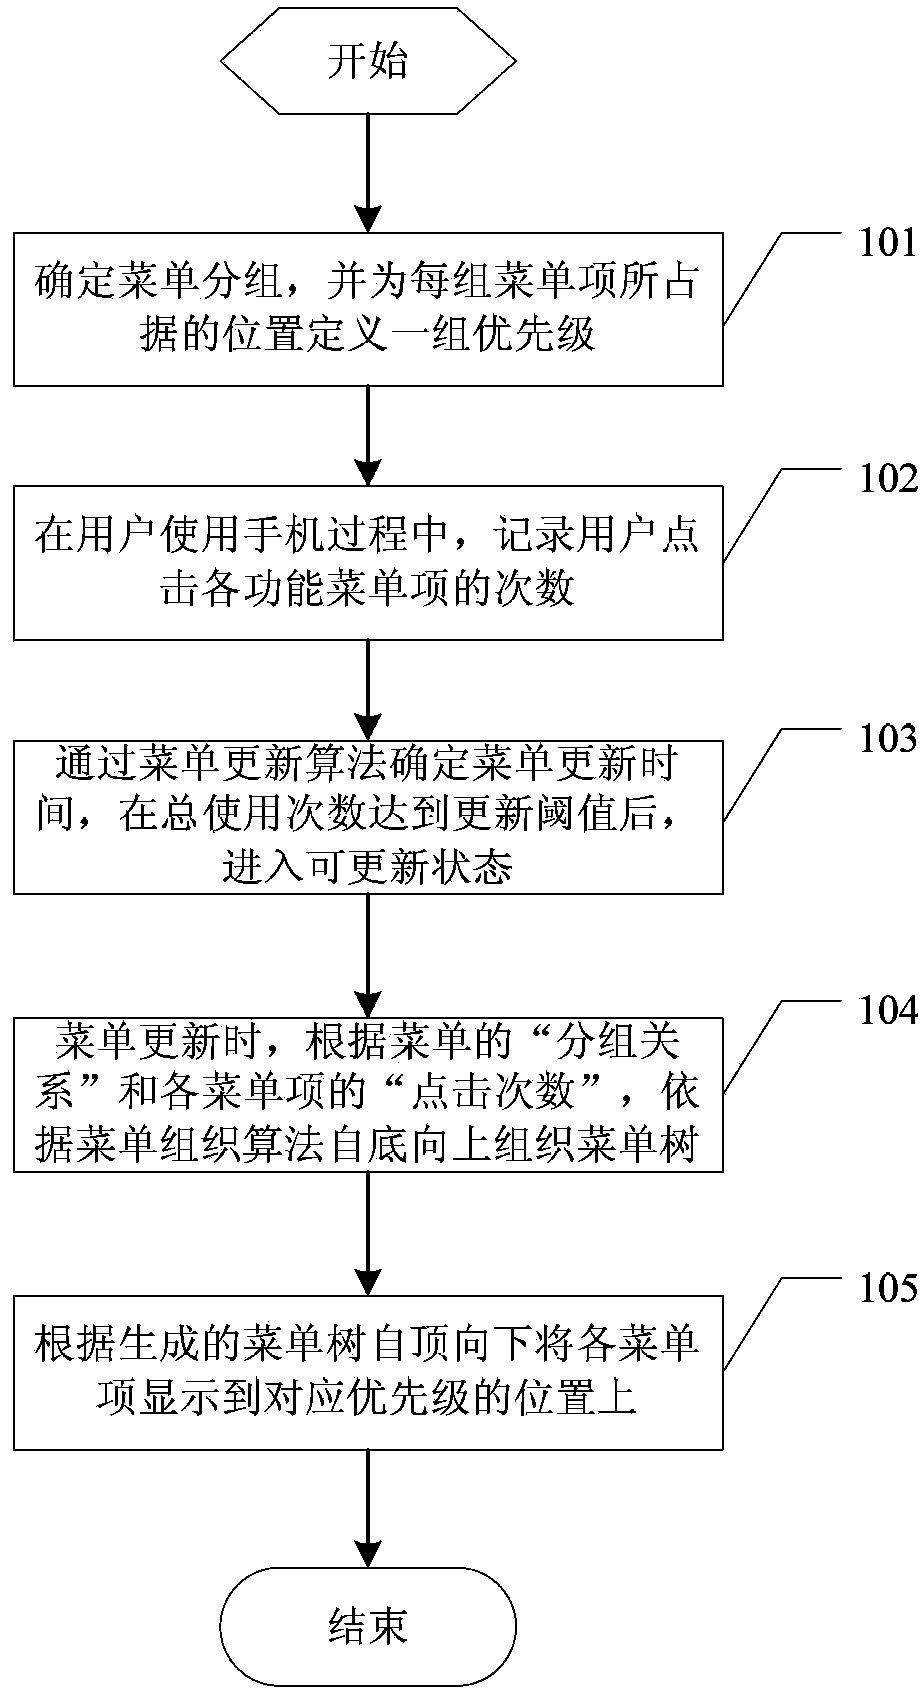 Method for achieving personalized and automated organization of menus and mobile terminal